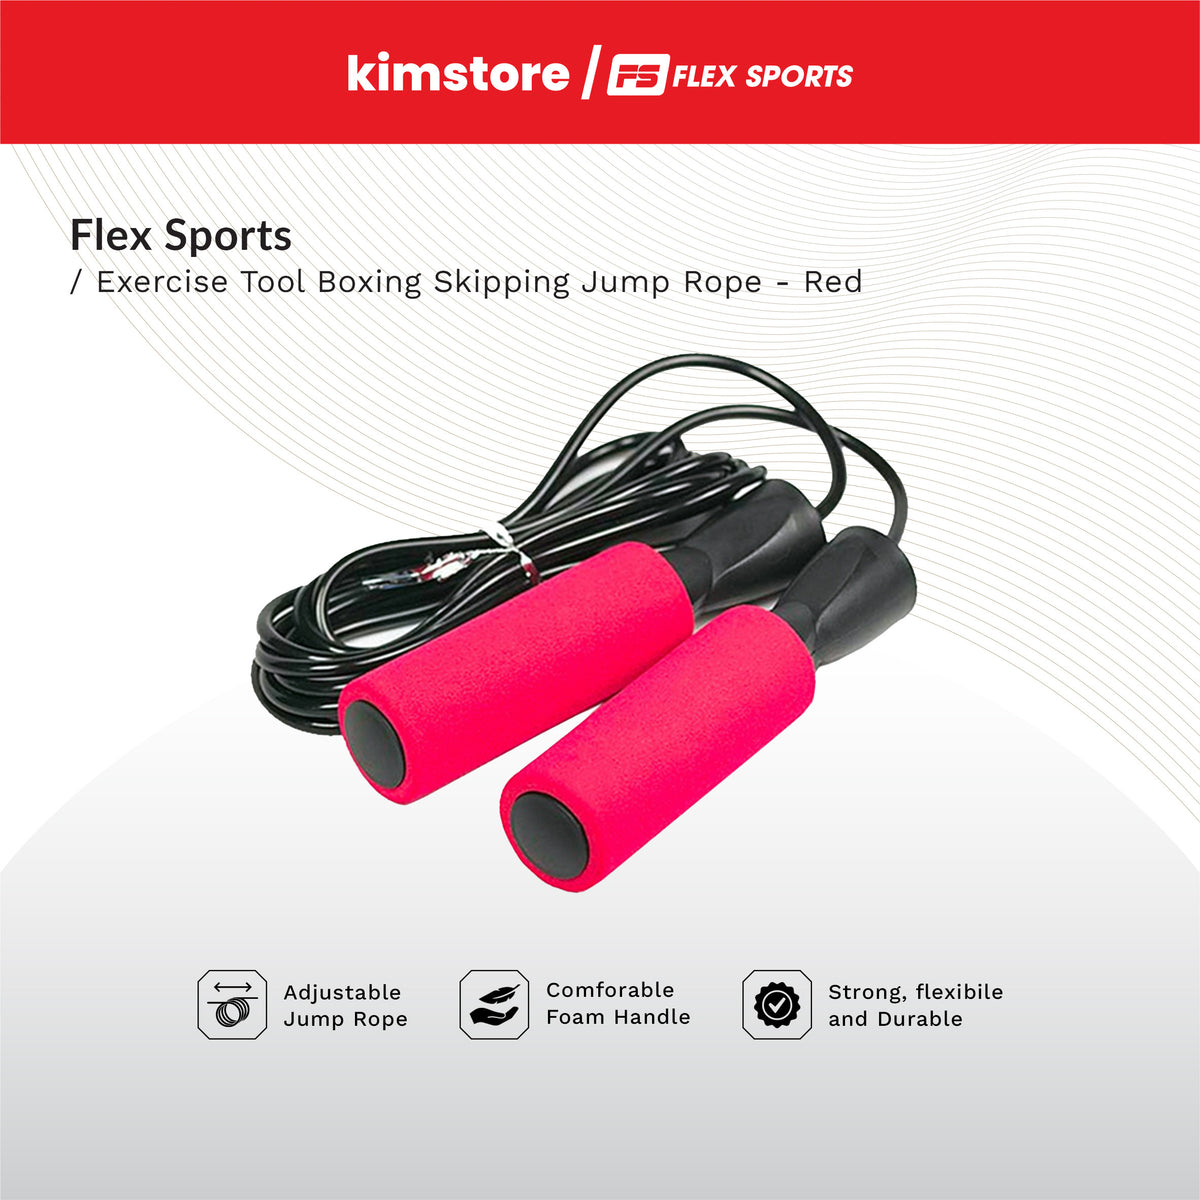 FLEX Sports Exercise Tool Boxing Skipping Jump Rope